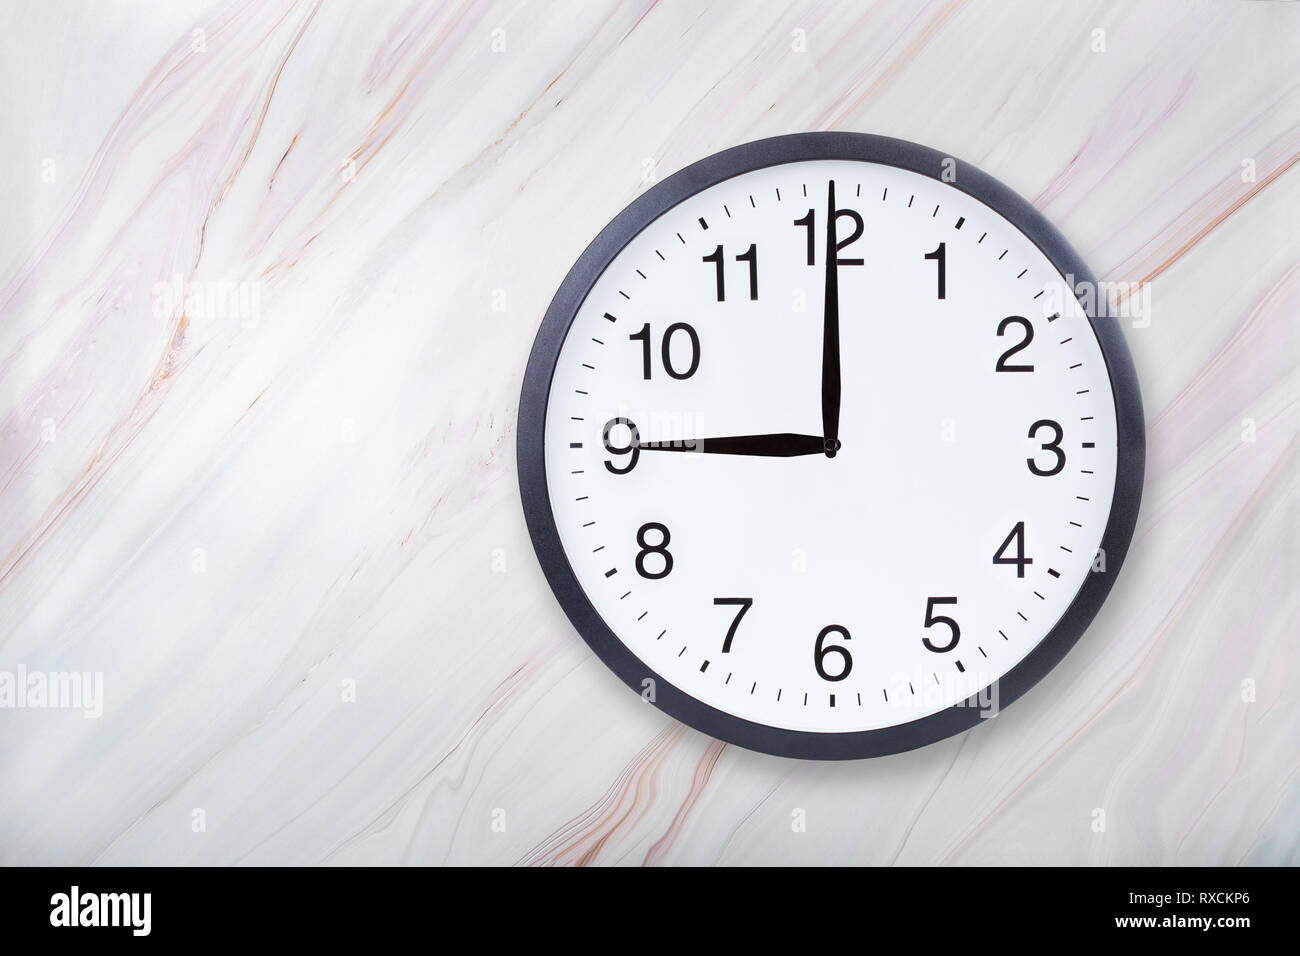 Wall Clock Show Nine O Clock On Marble Texture Office Clock Show 9pm Or 9am Stock Photo Alamy